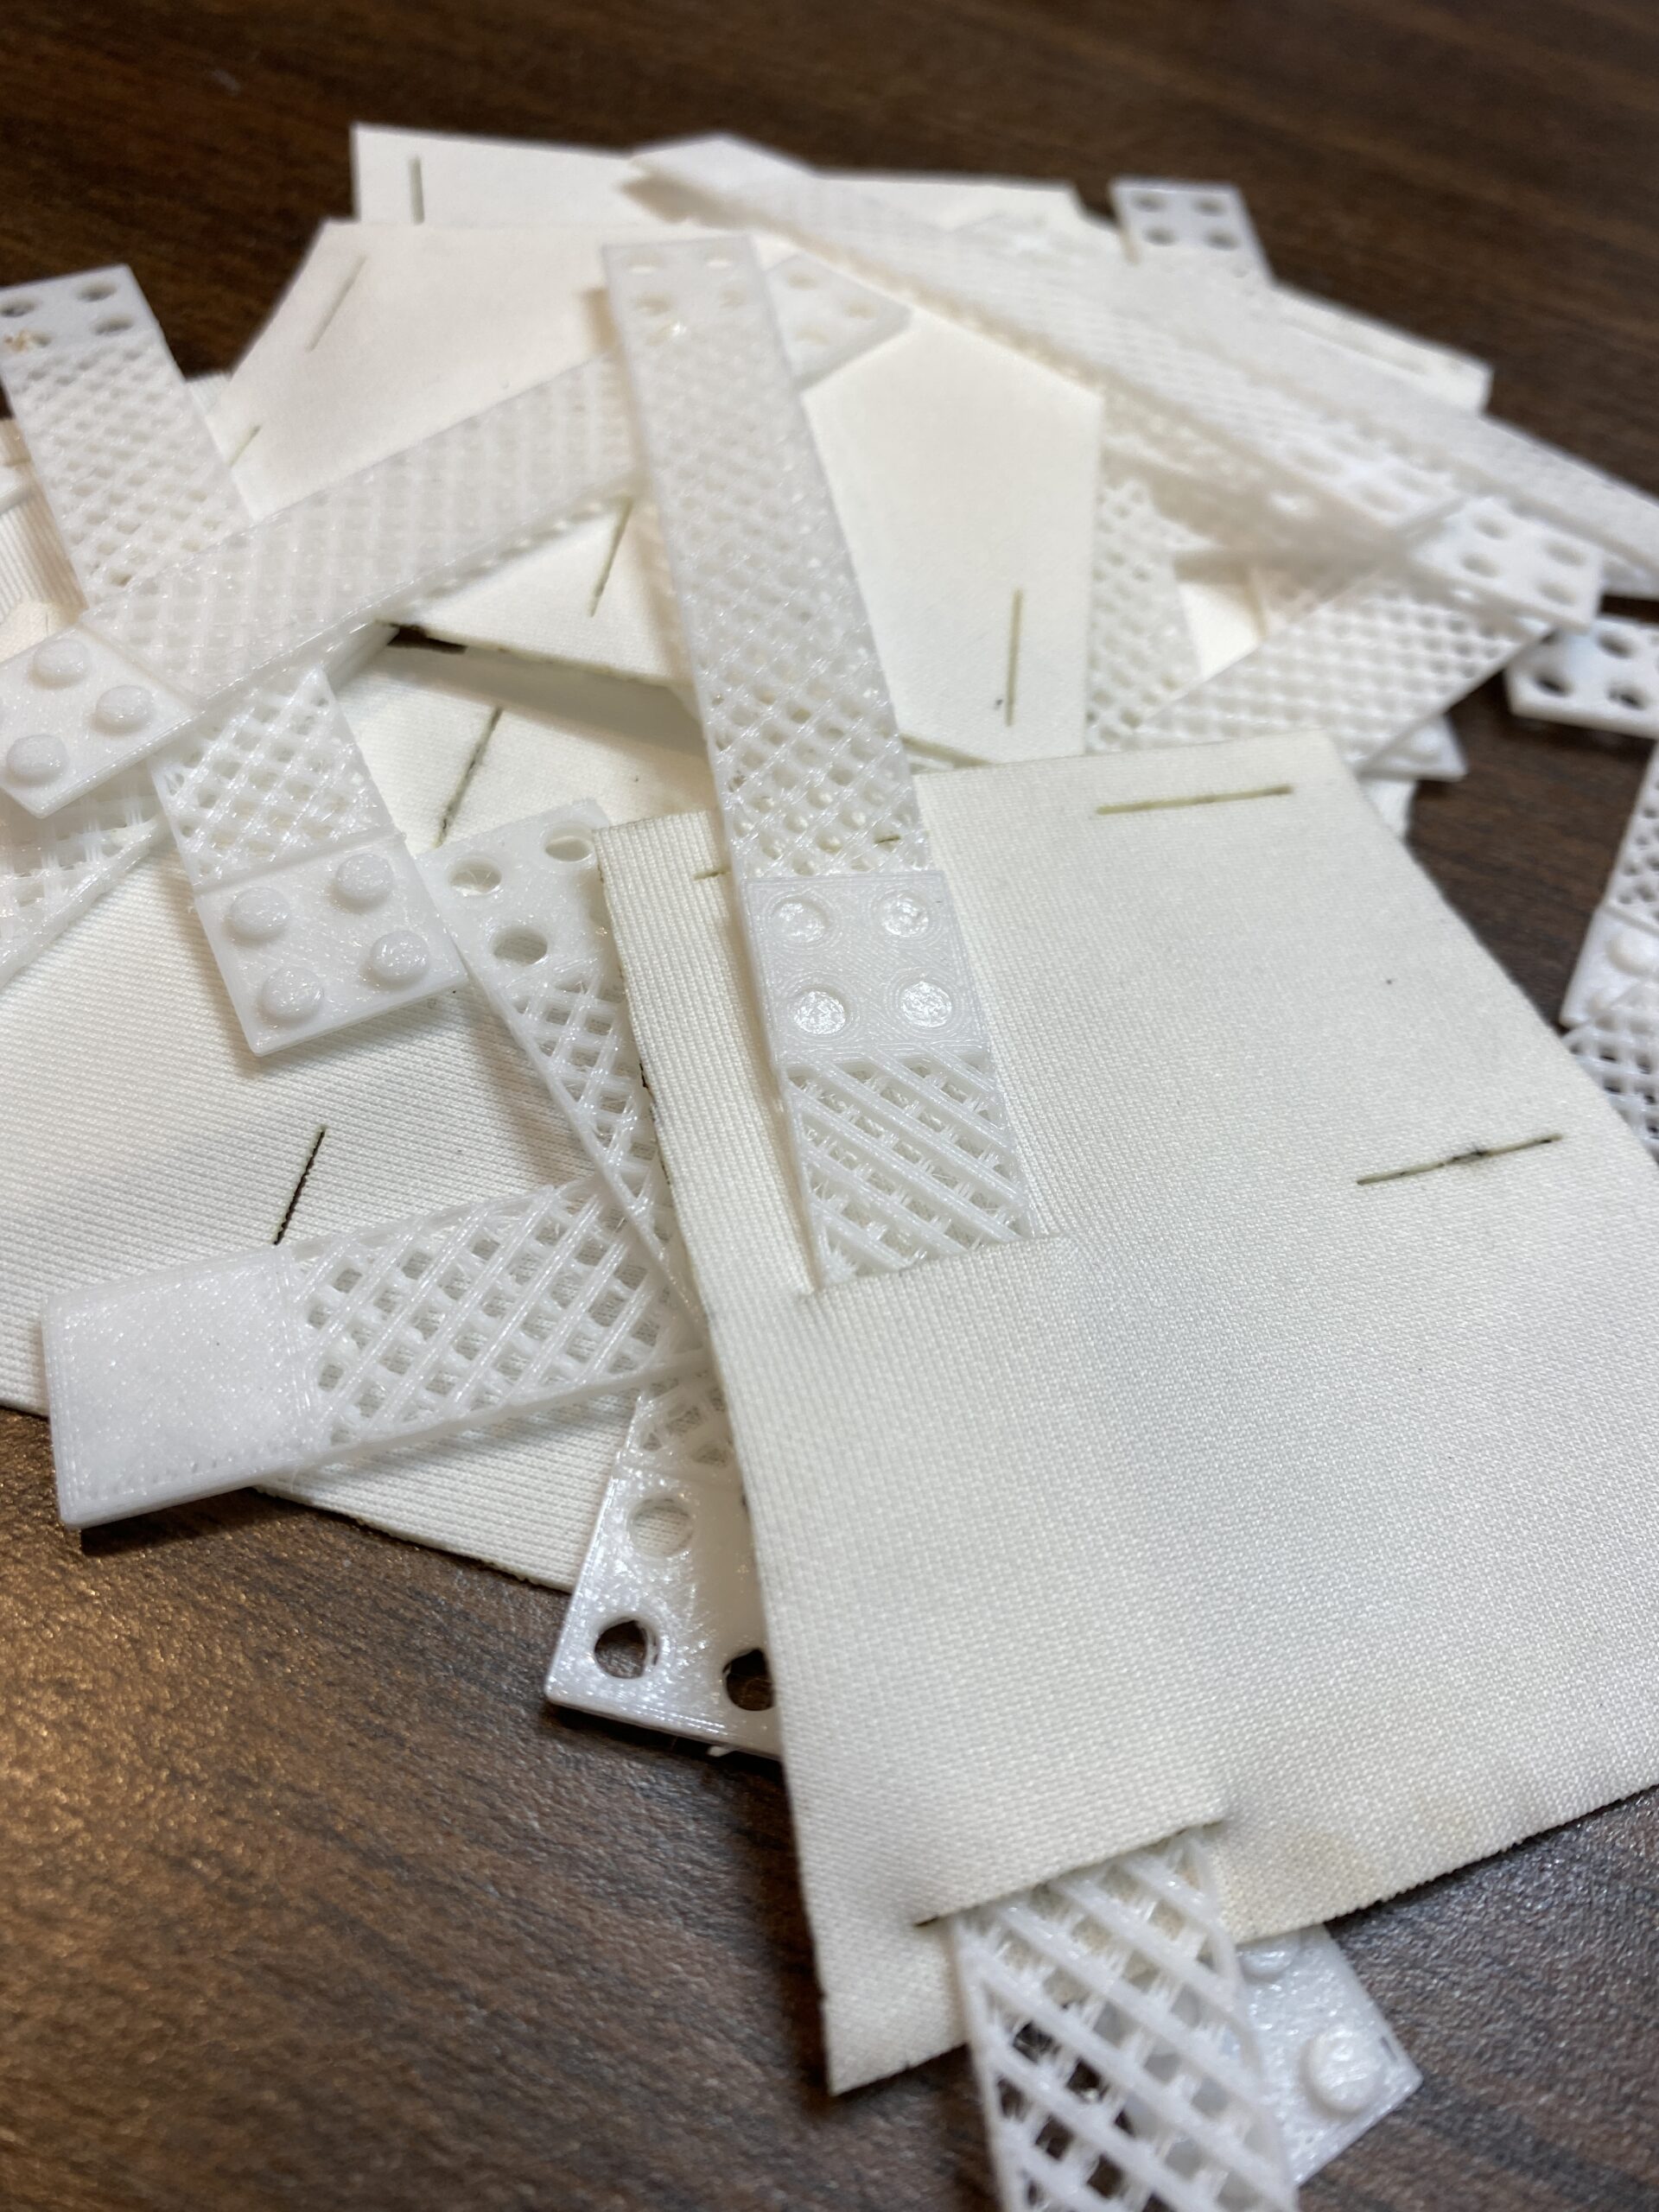 3D printed modular connectors and geometric shapes pre assembly